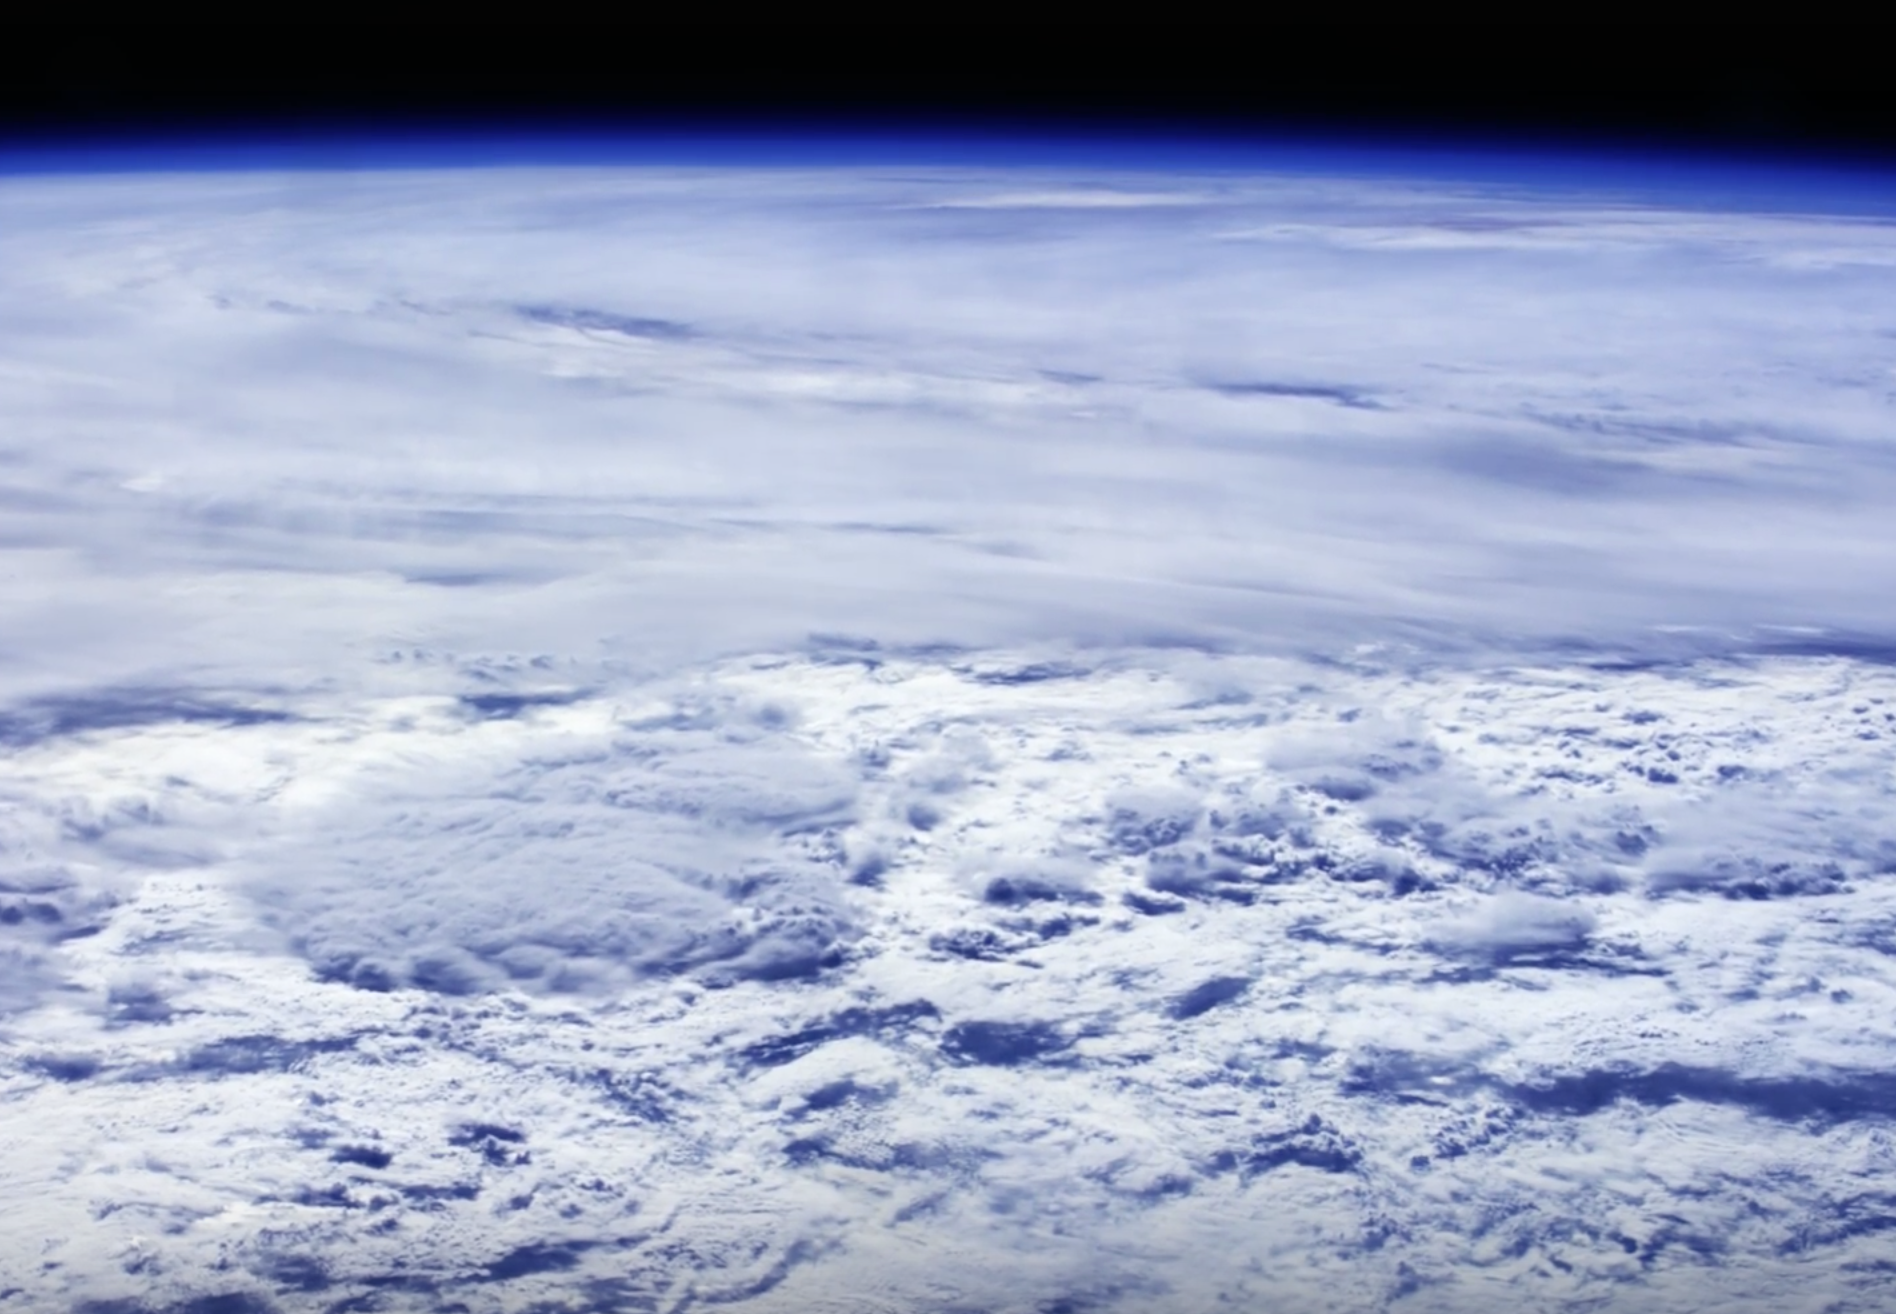 nasa just uploaded its first 4k 60fps space video to youtube image 1